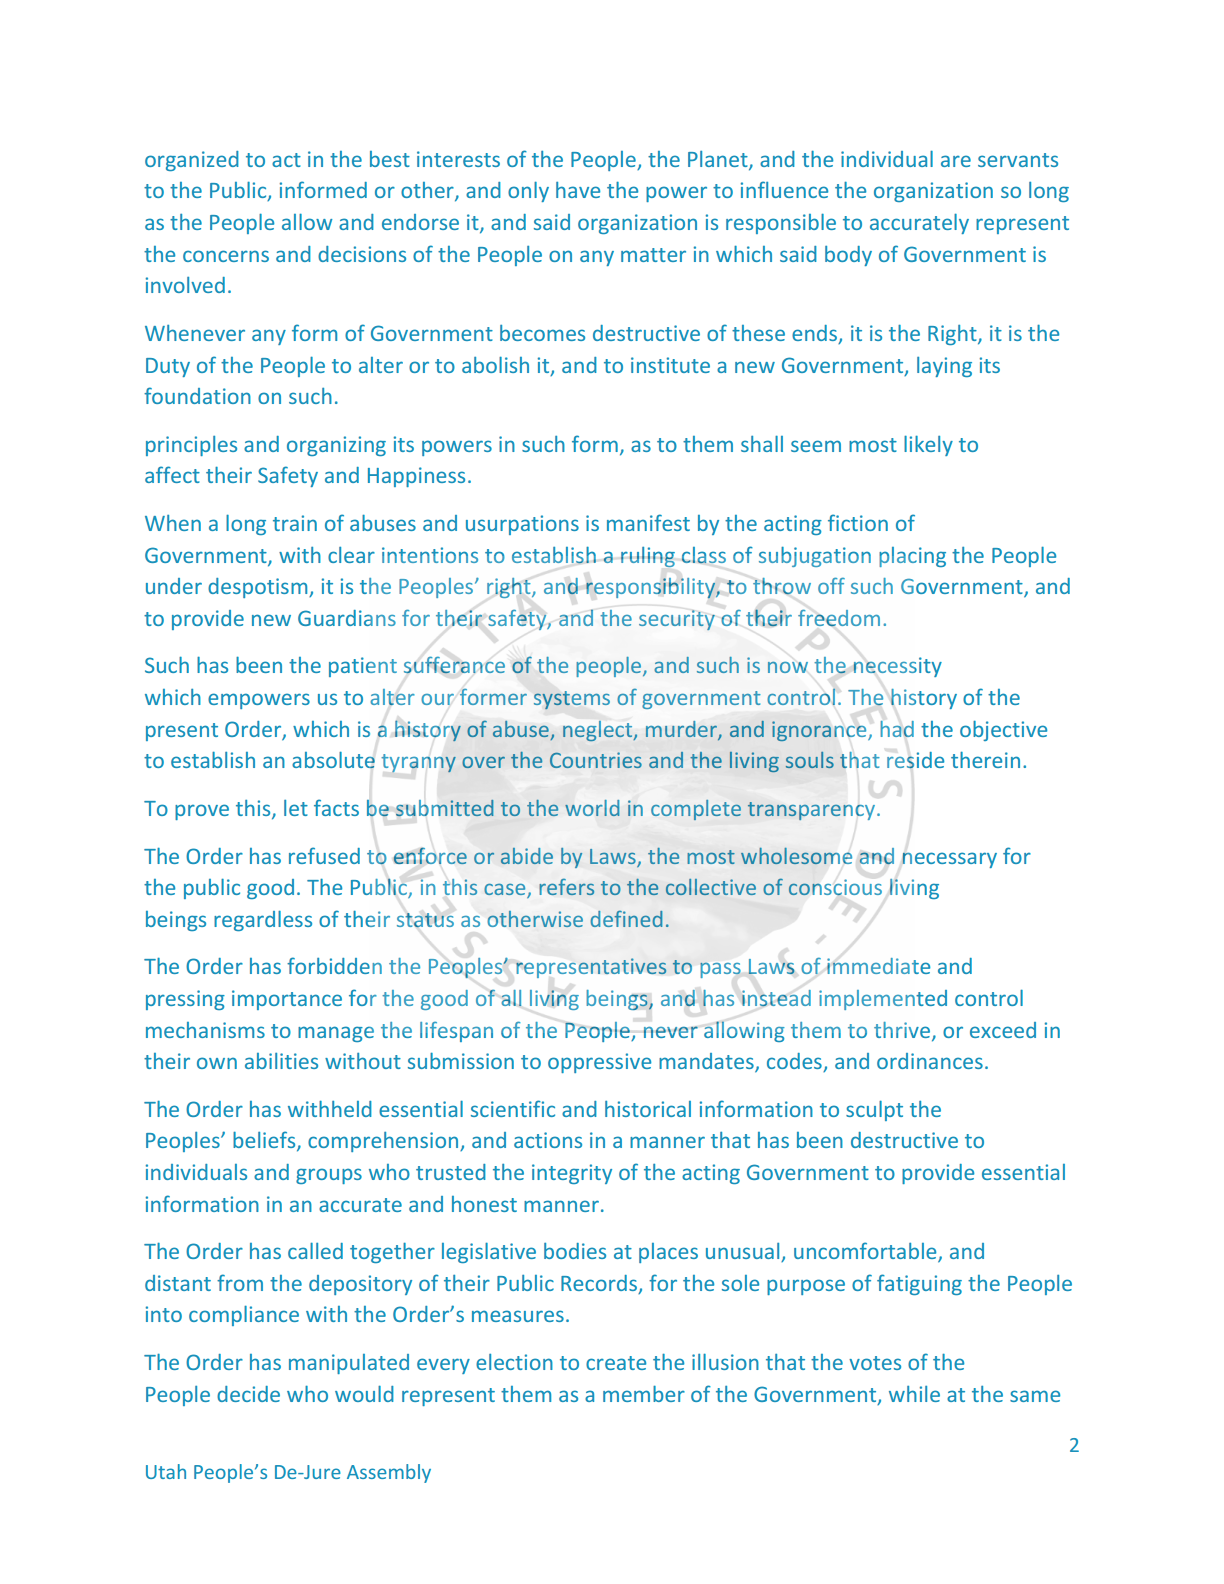 New Declaration of Independencepng_Page2